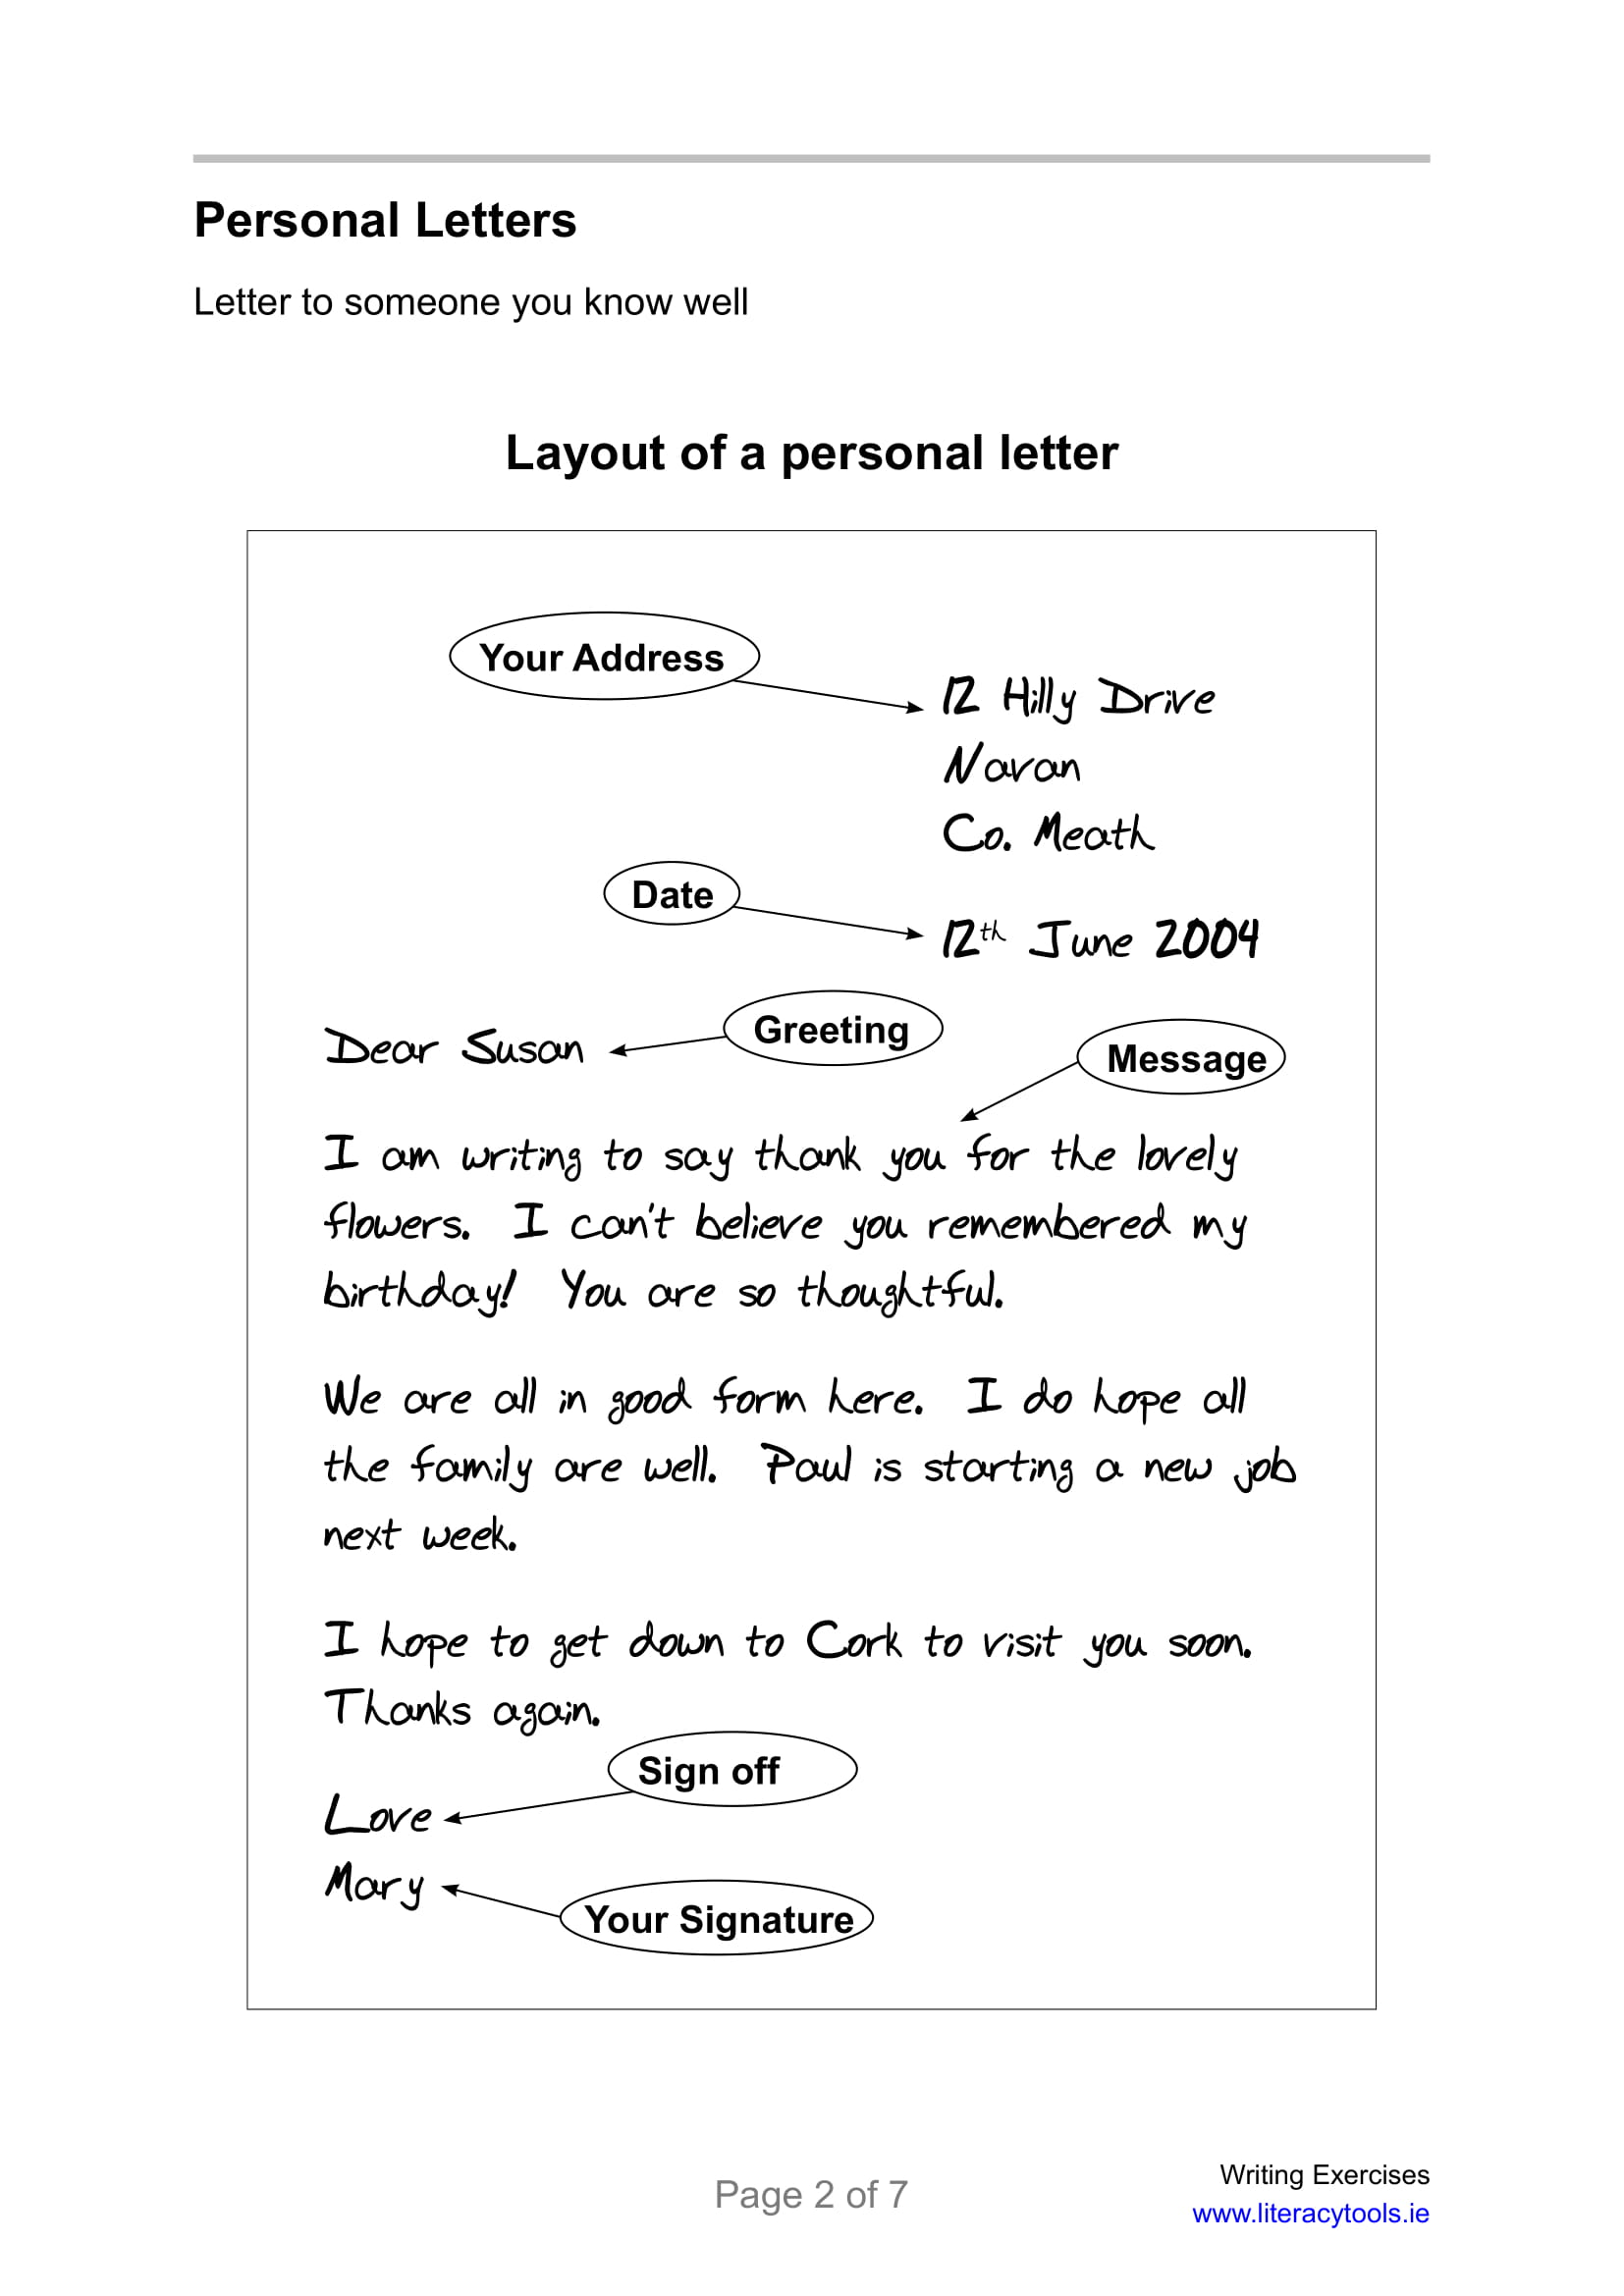 personal letter layout example